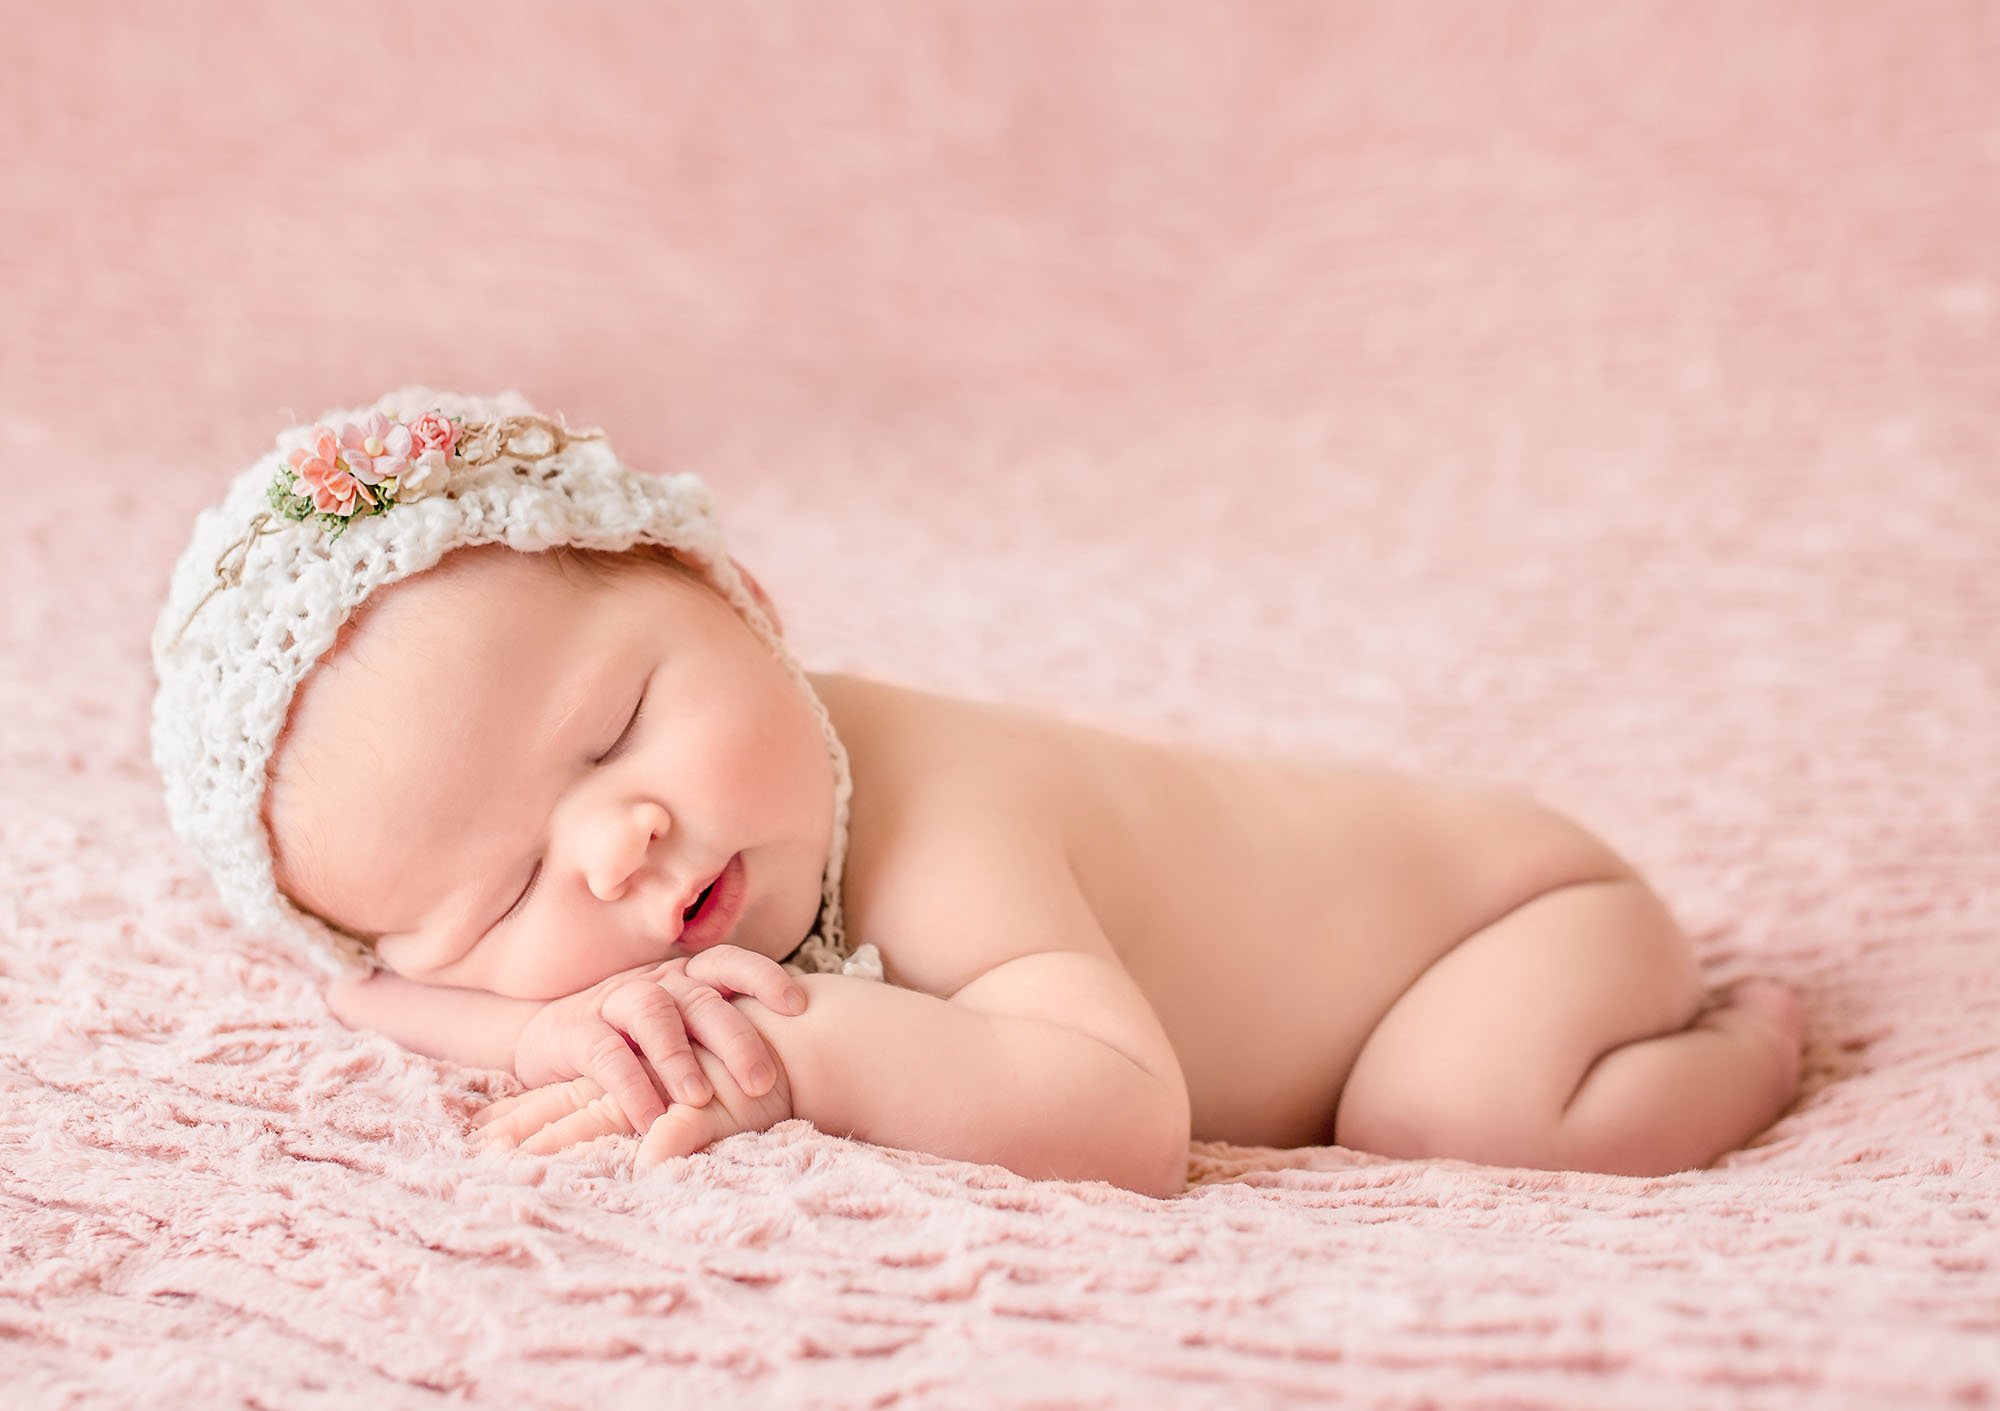 newborn baby girl sleeping with hands under cheek knitted bonnet with flowers One Big Happy Photo